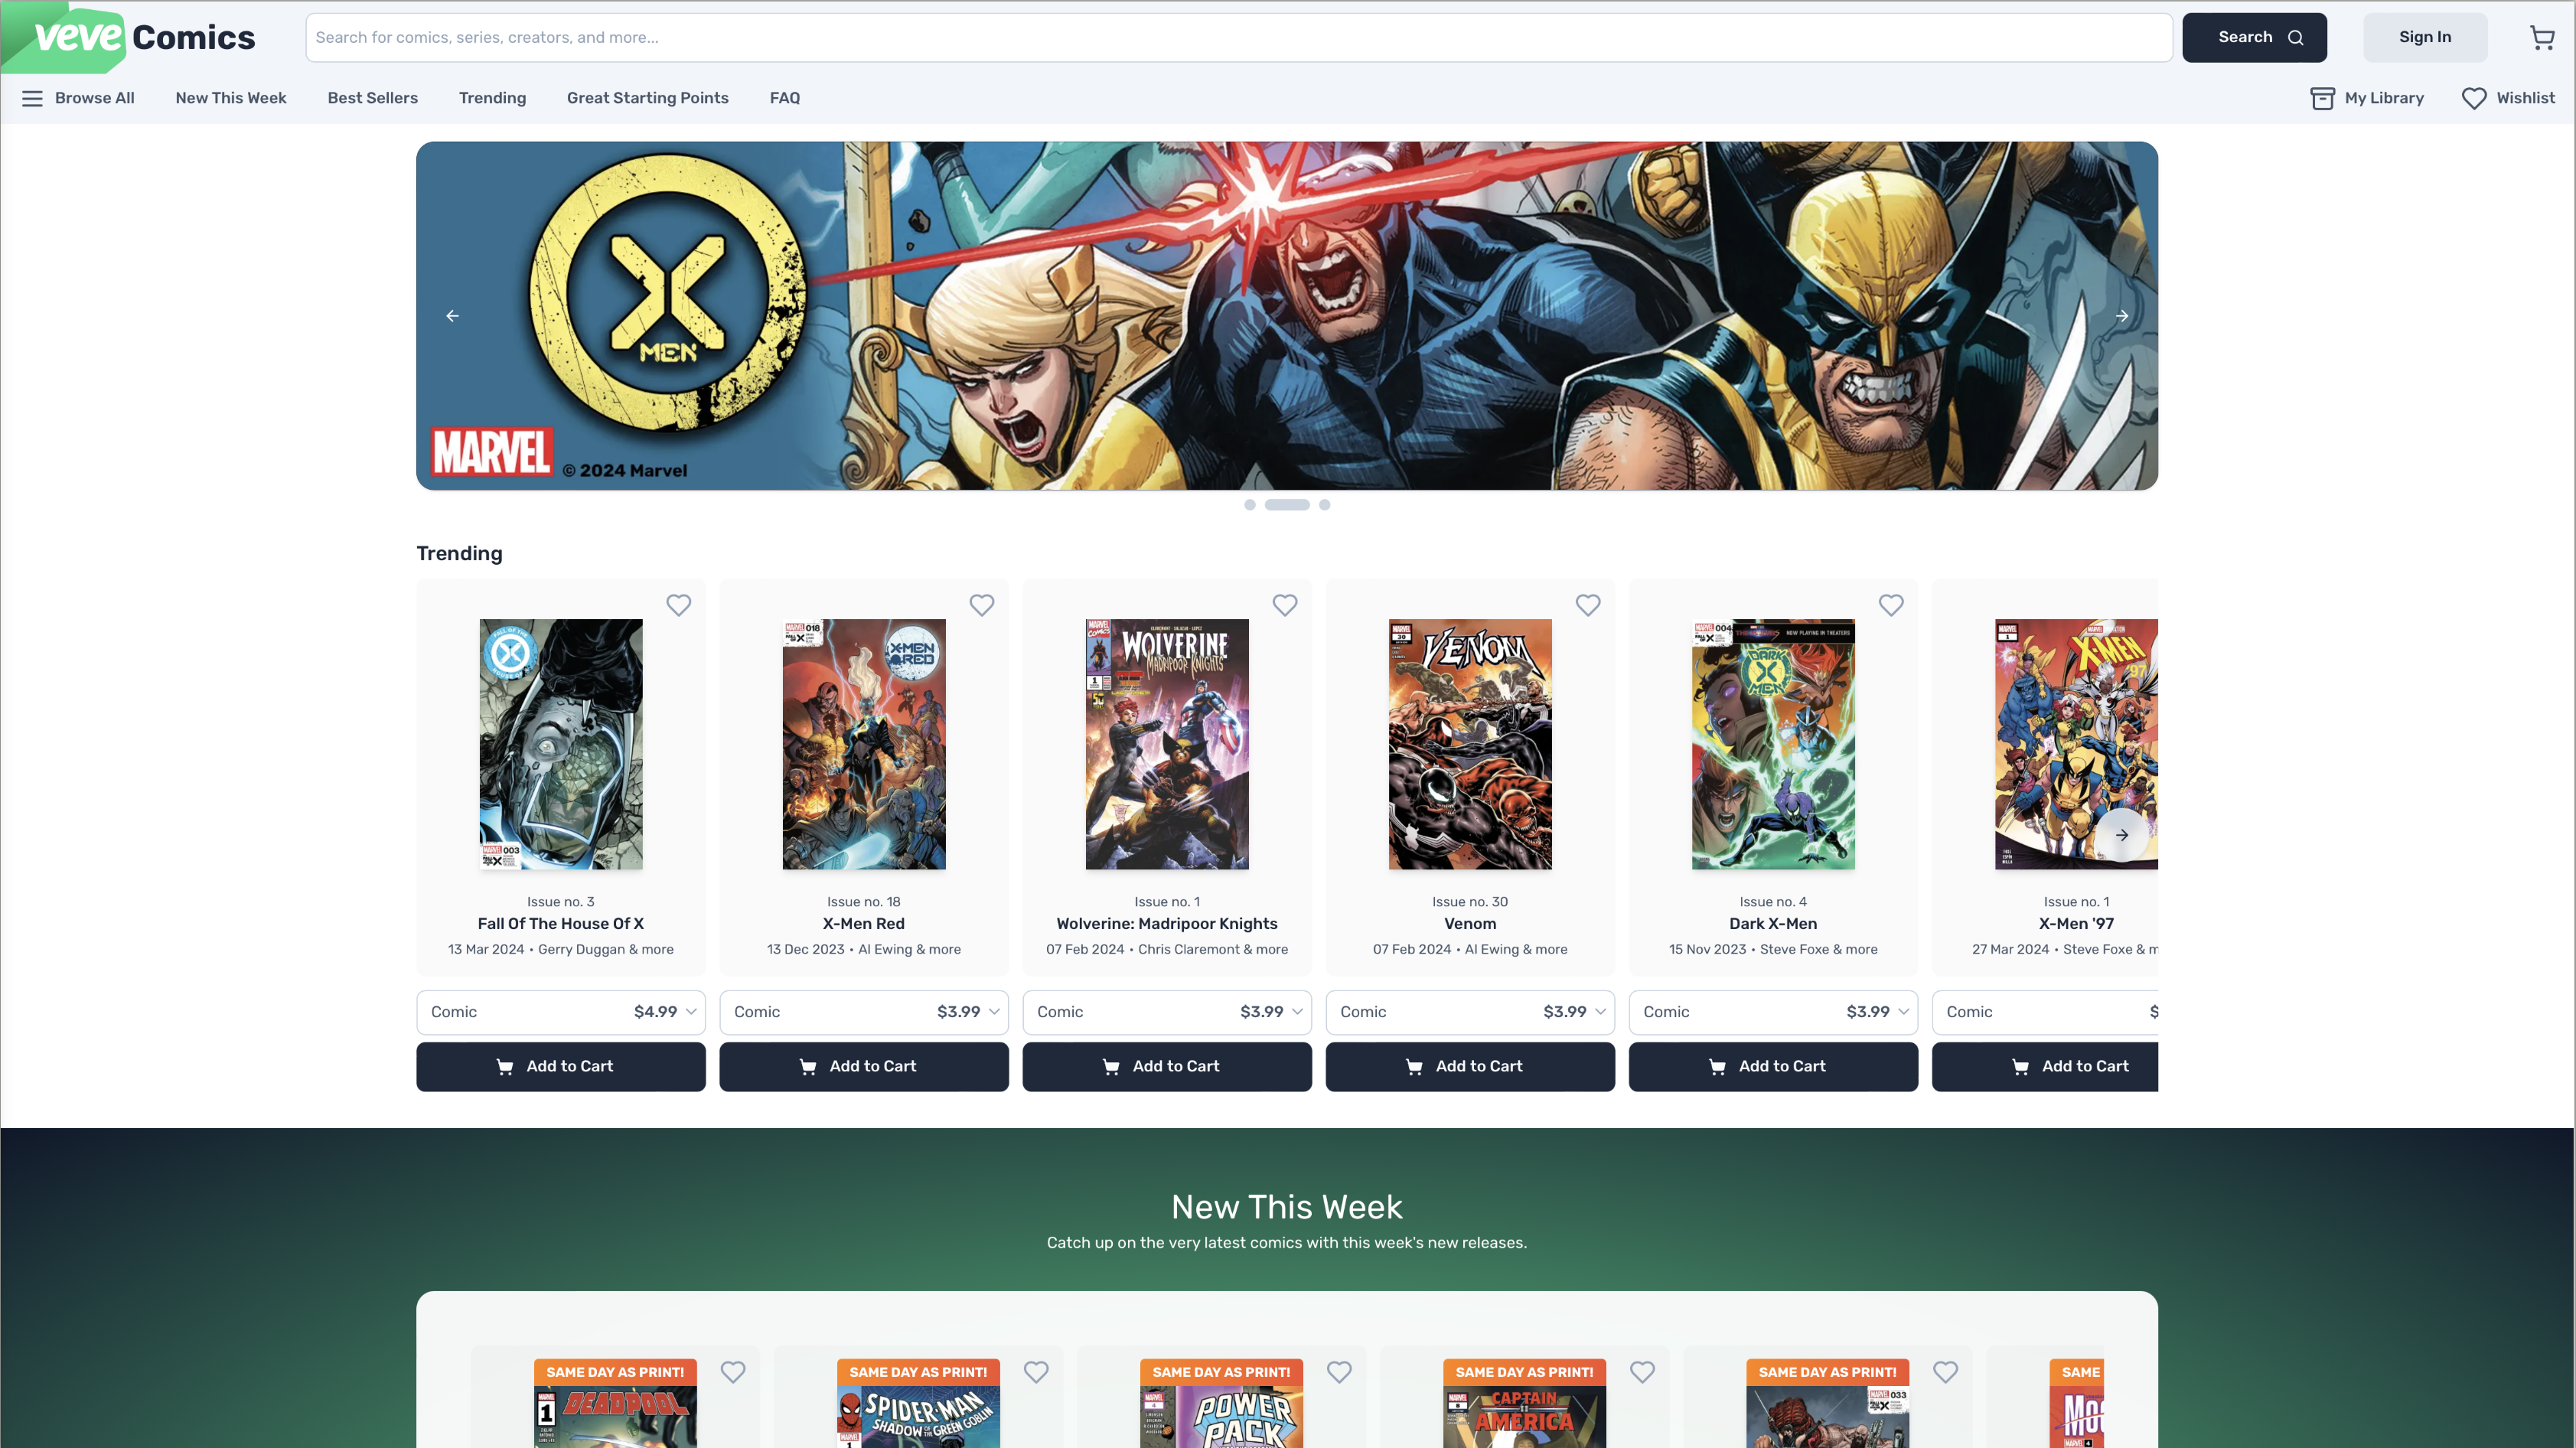 VeVe Comics home page in a desktop web browser